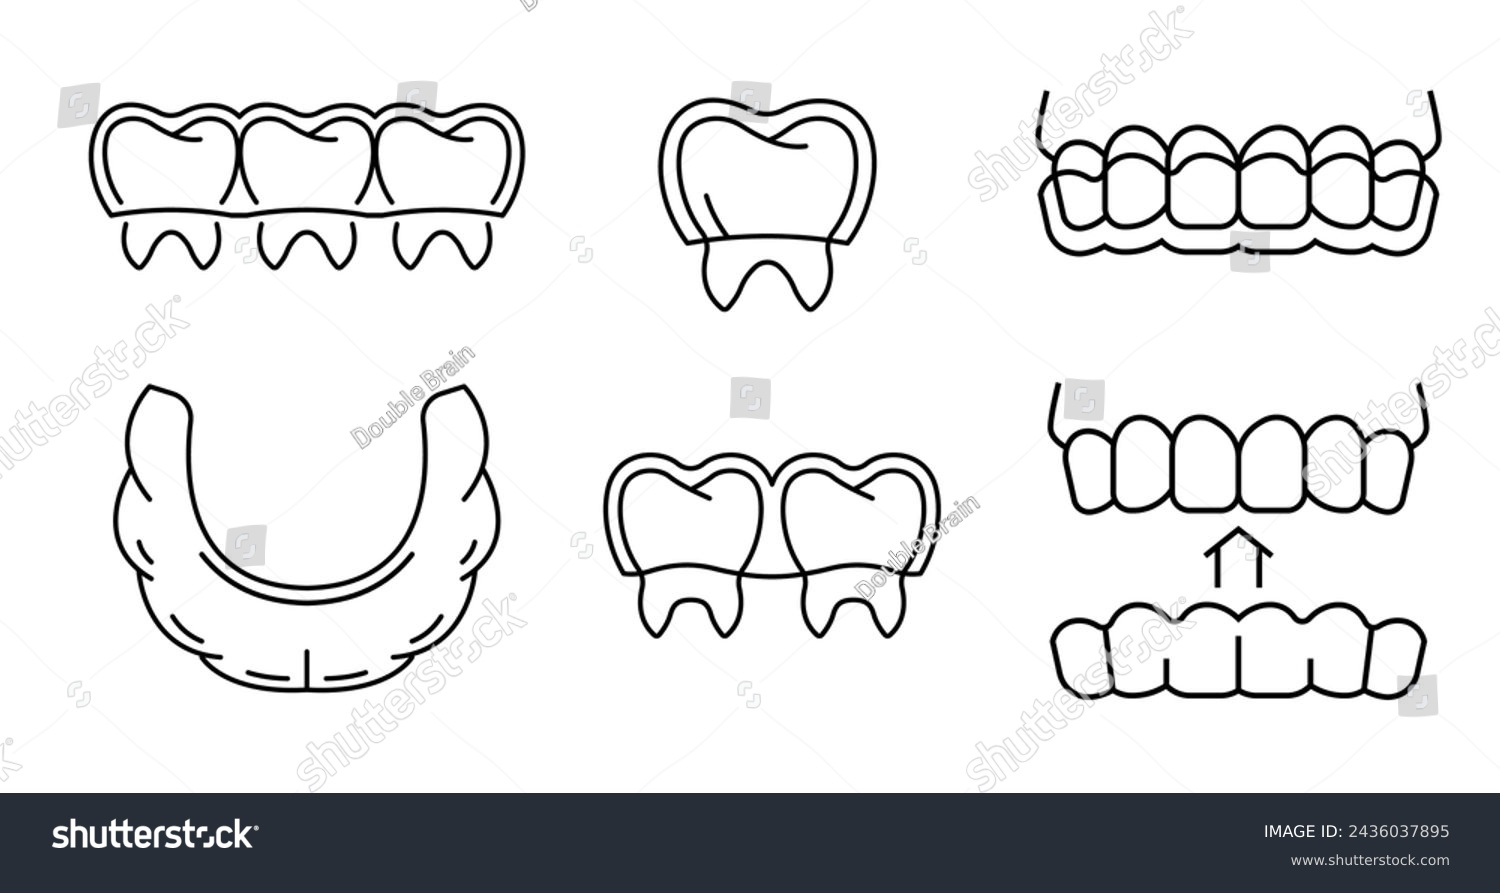 Orthodontic silicone trainer. Invisible braces aligner, retainer. Medical icon, linear pictogram, sign. Editable vector illustration in thin outline style isolated on a white background. #2436037895